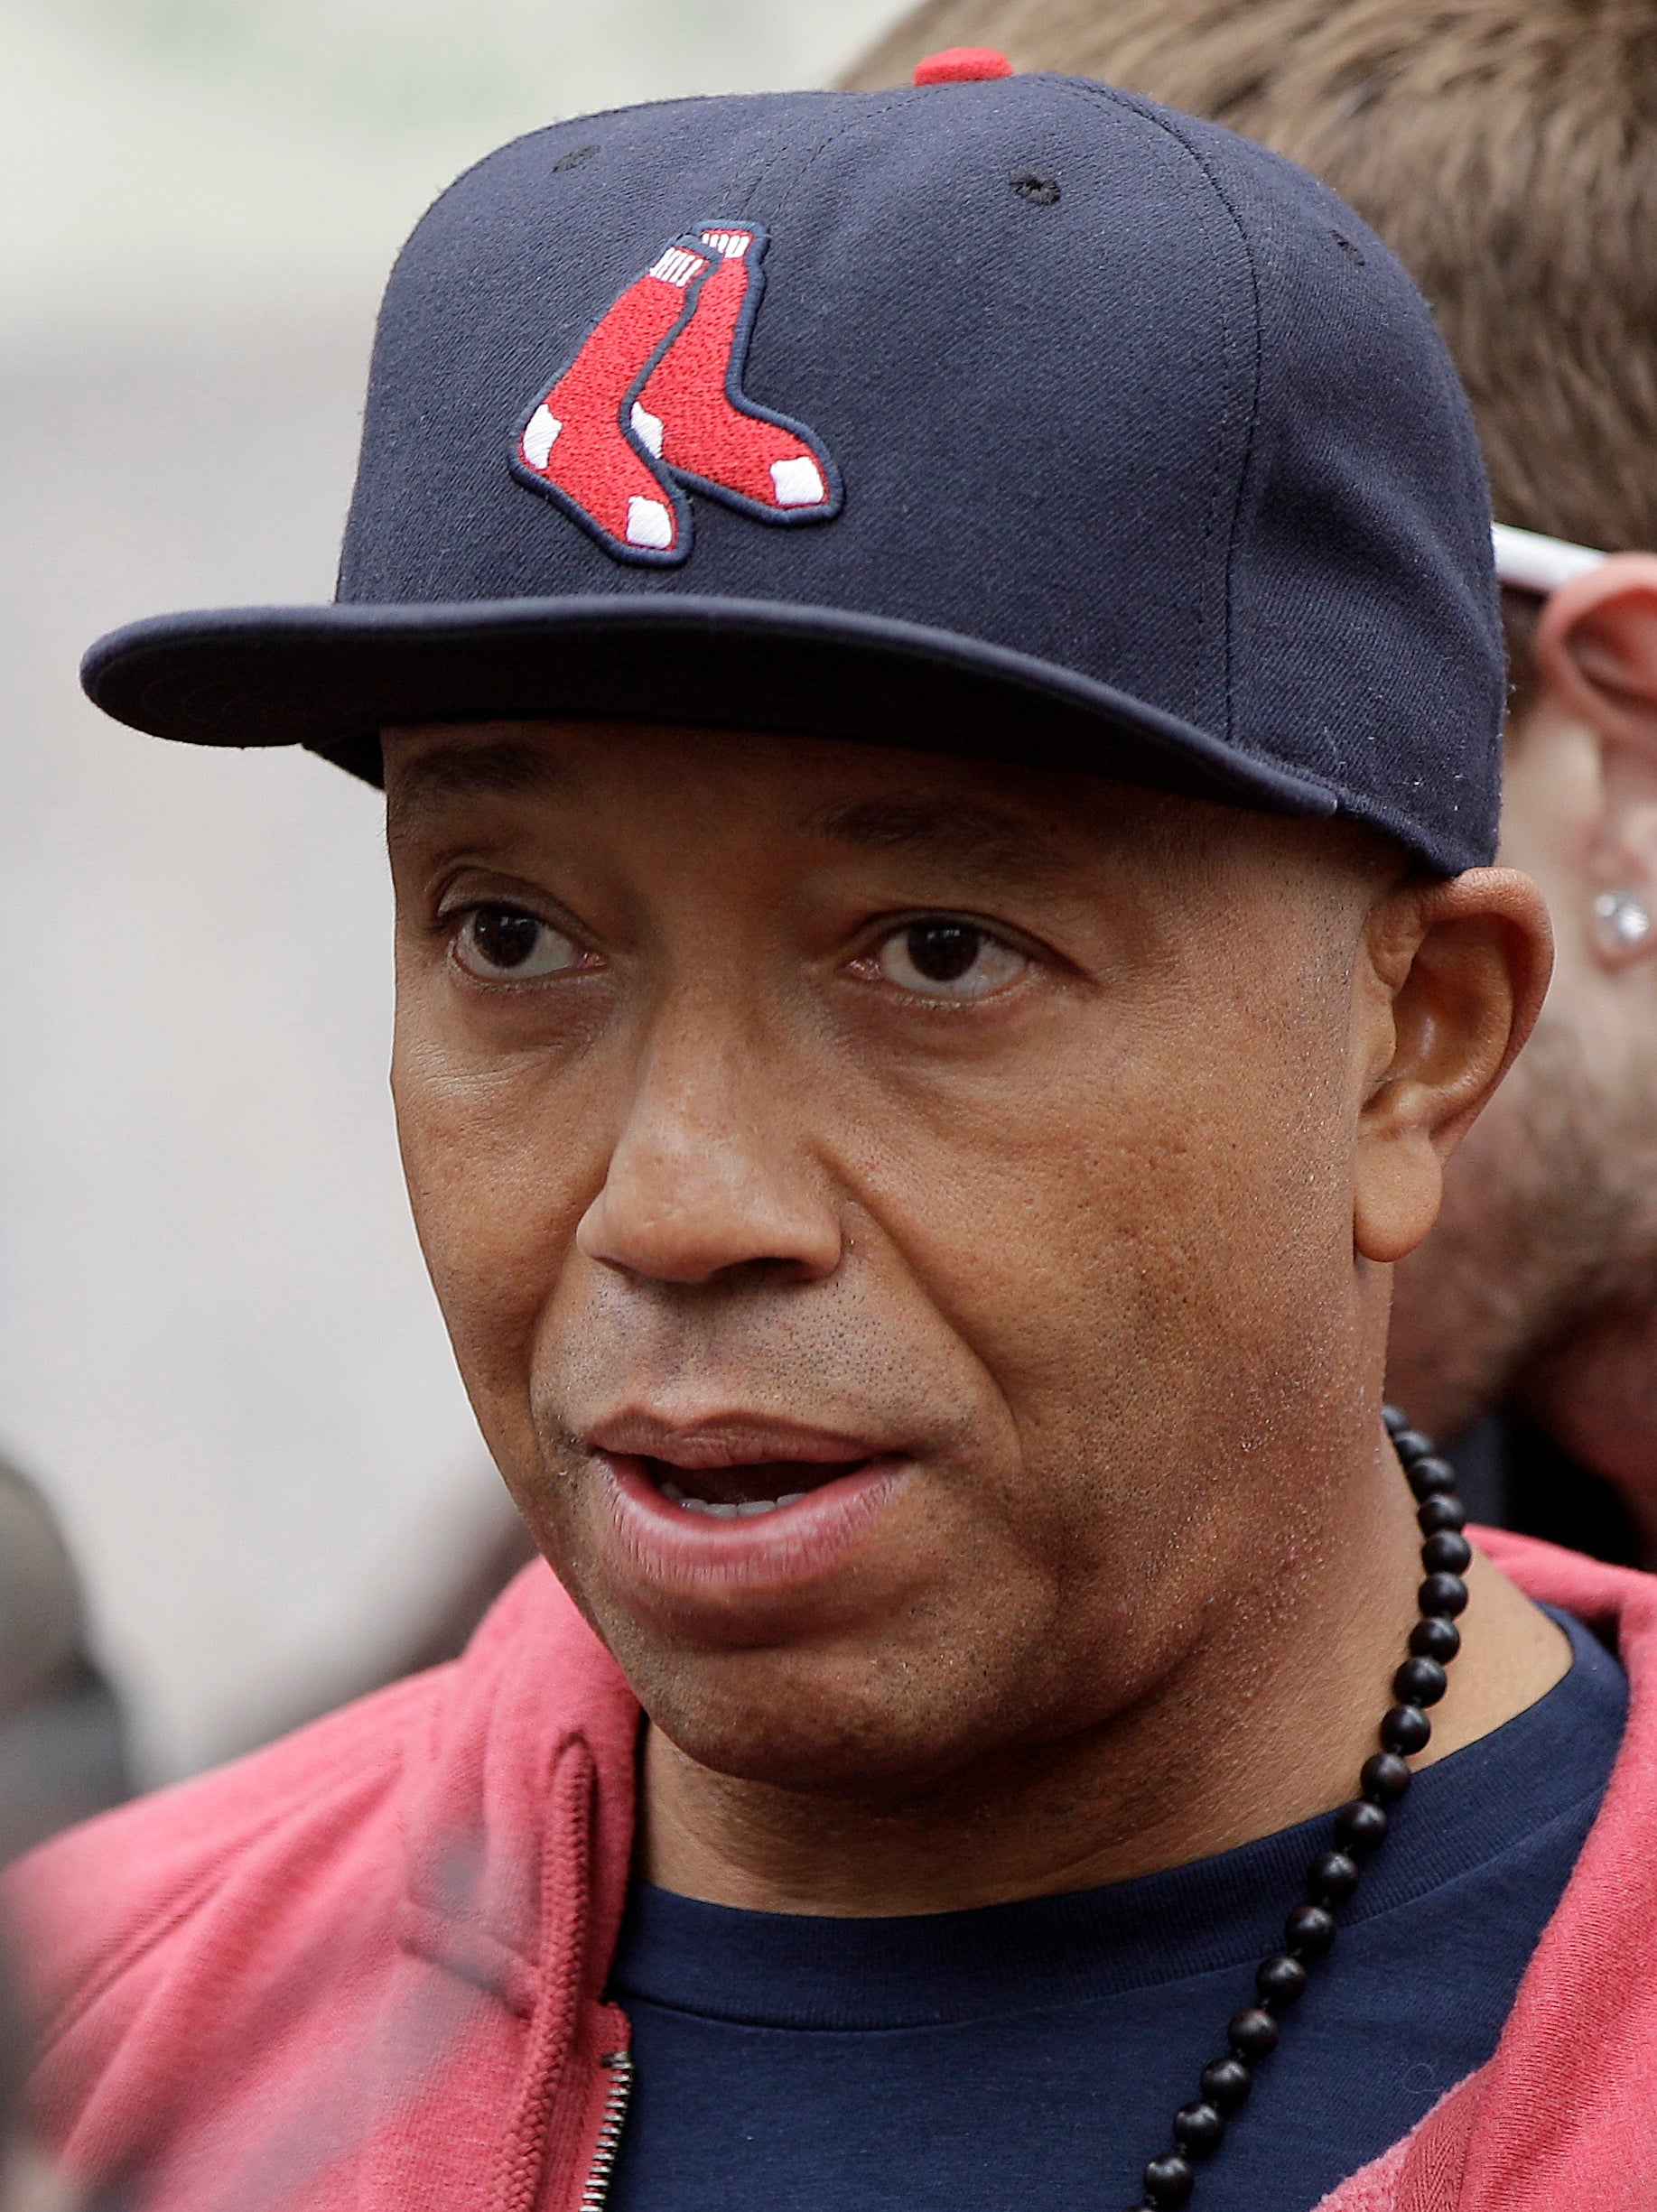 PETA Honors Russell Simmons with a Stamp